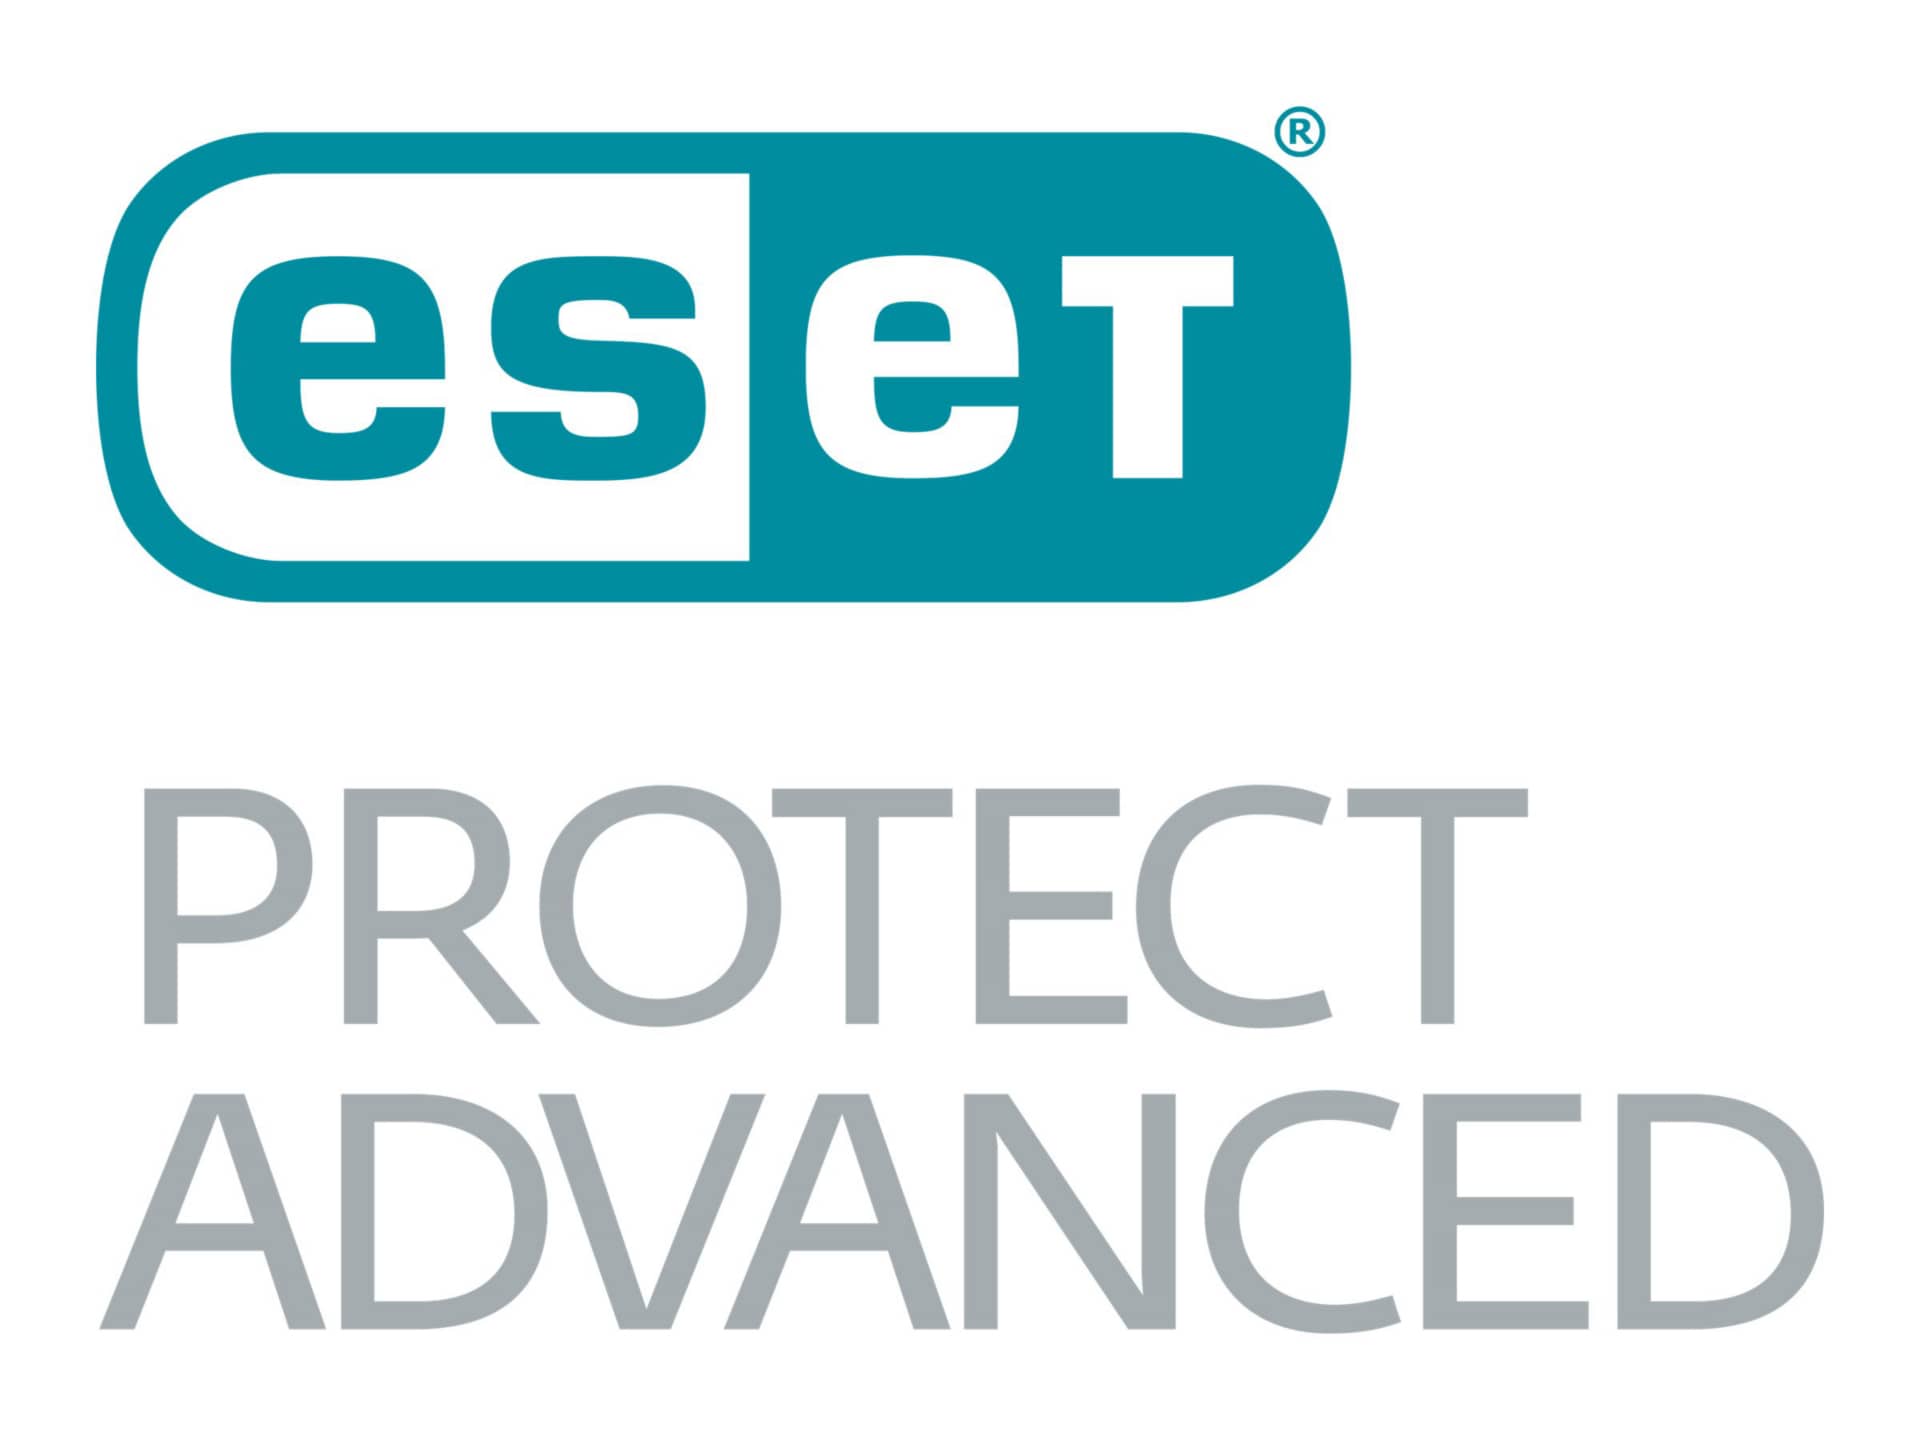 ESET PROTECT Advanced - subscription license (3 years) - 1 seat